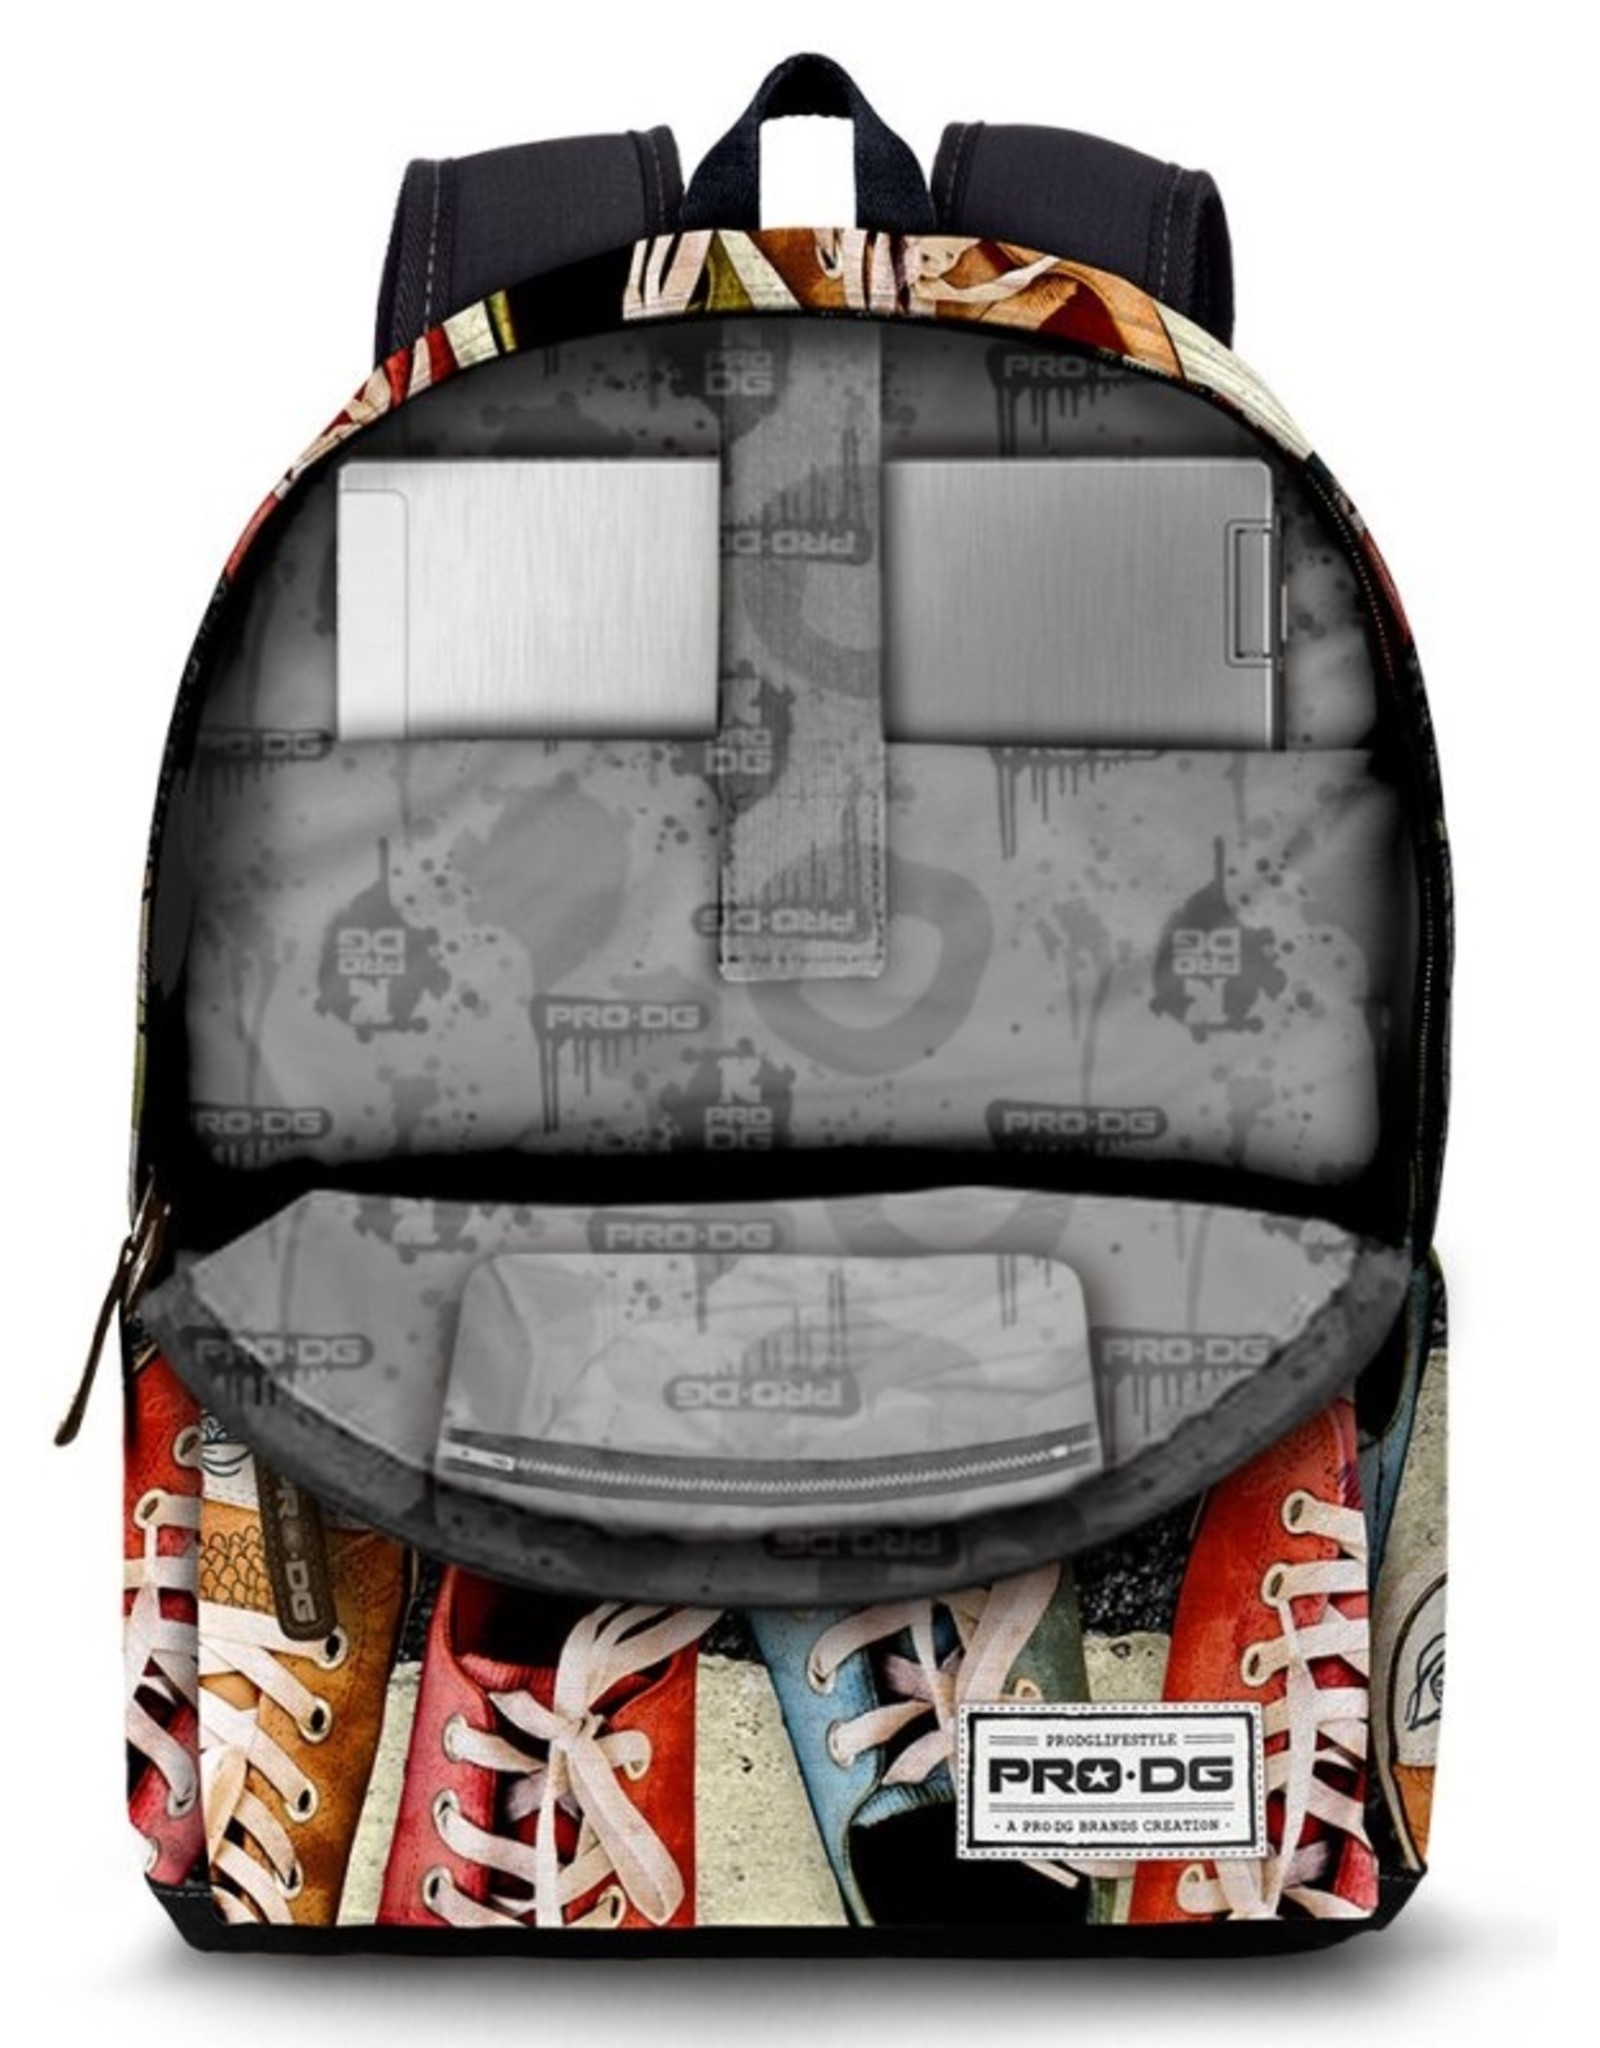 Pro-DG Backpacks and fanny bags - Backpack with Sneakers print Pro-DG